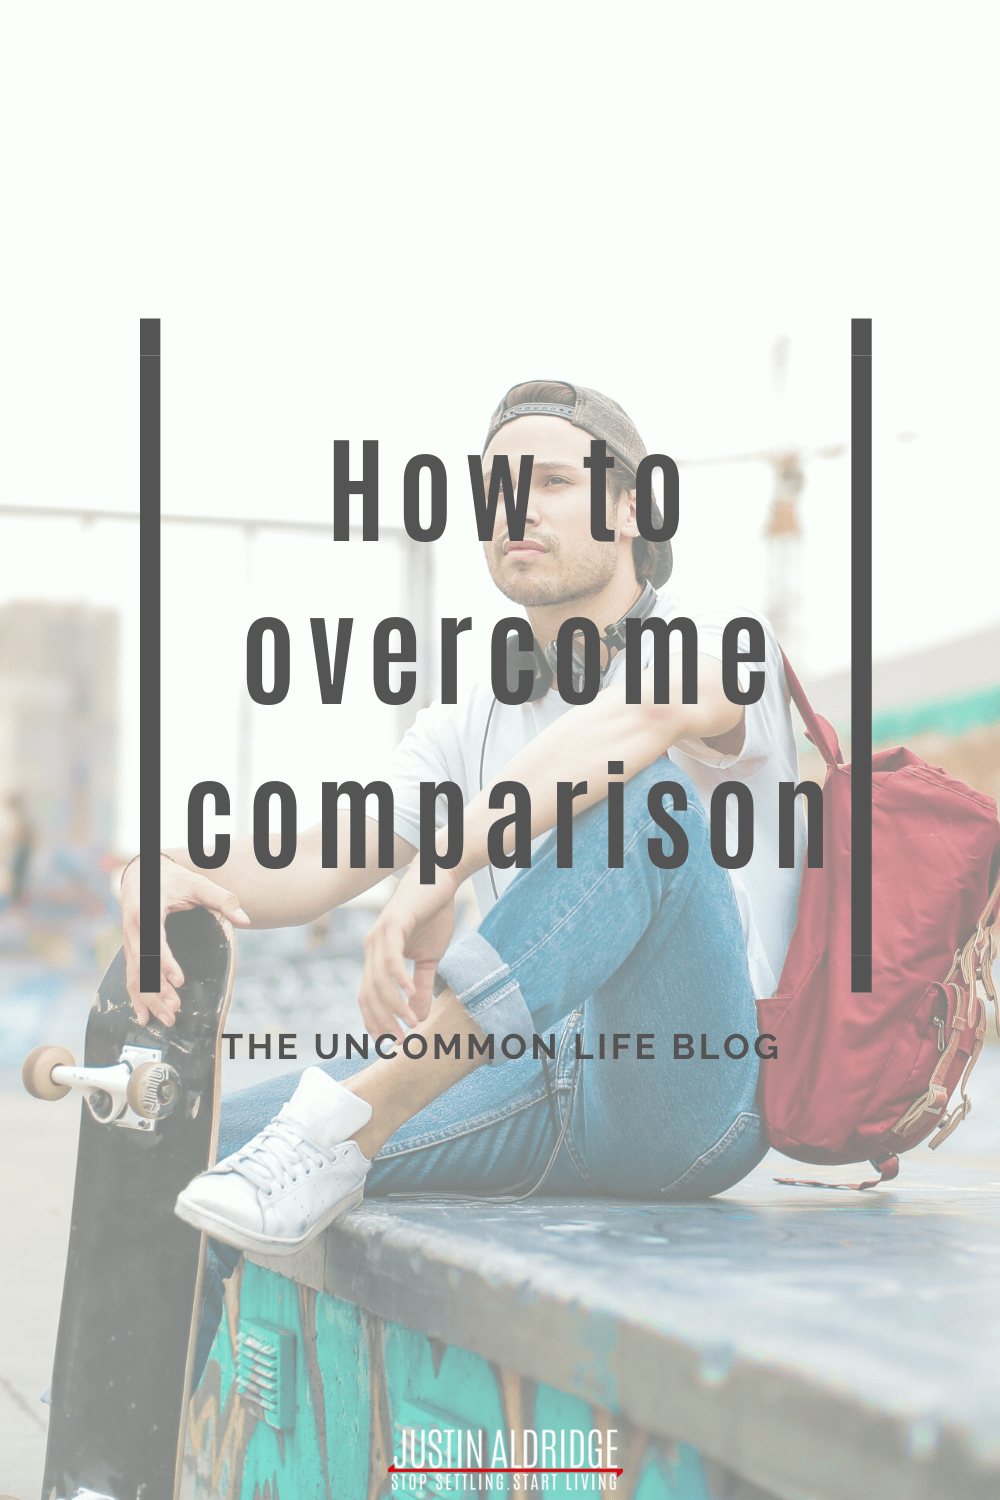 Man sitting down holding a skateboard in the background behind the text, "How to overcome comparison" in grey font